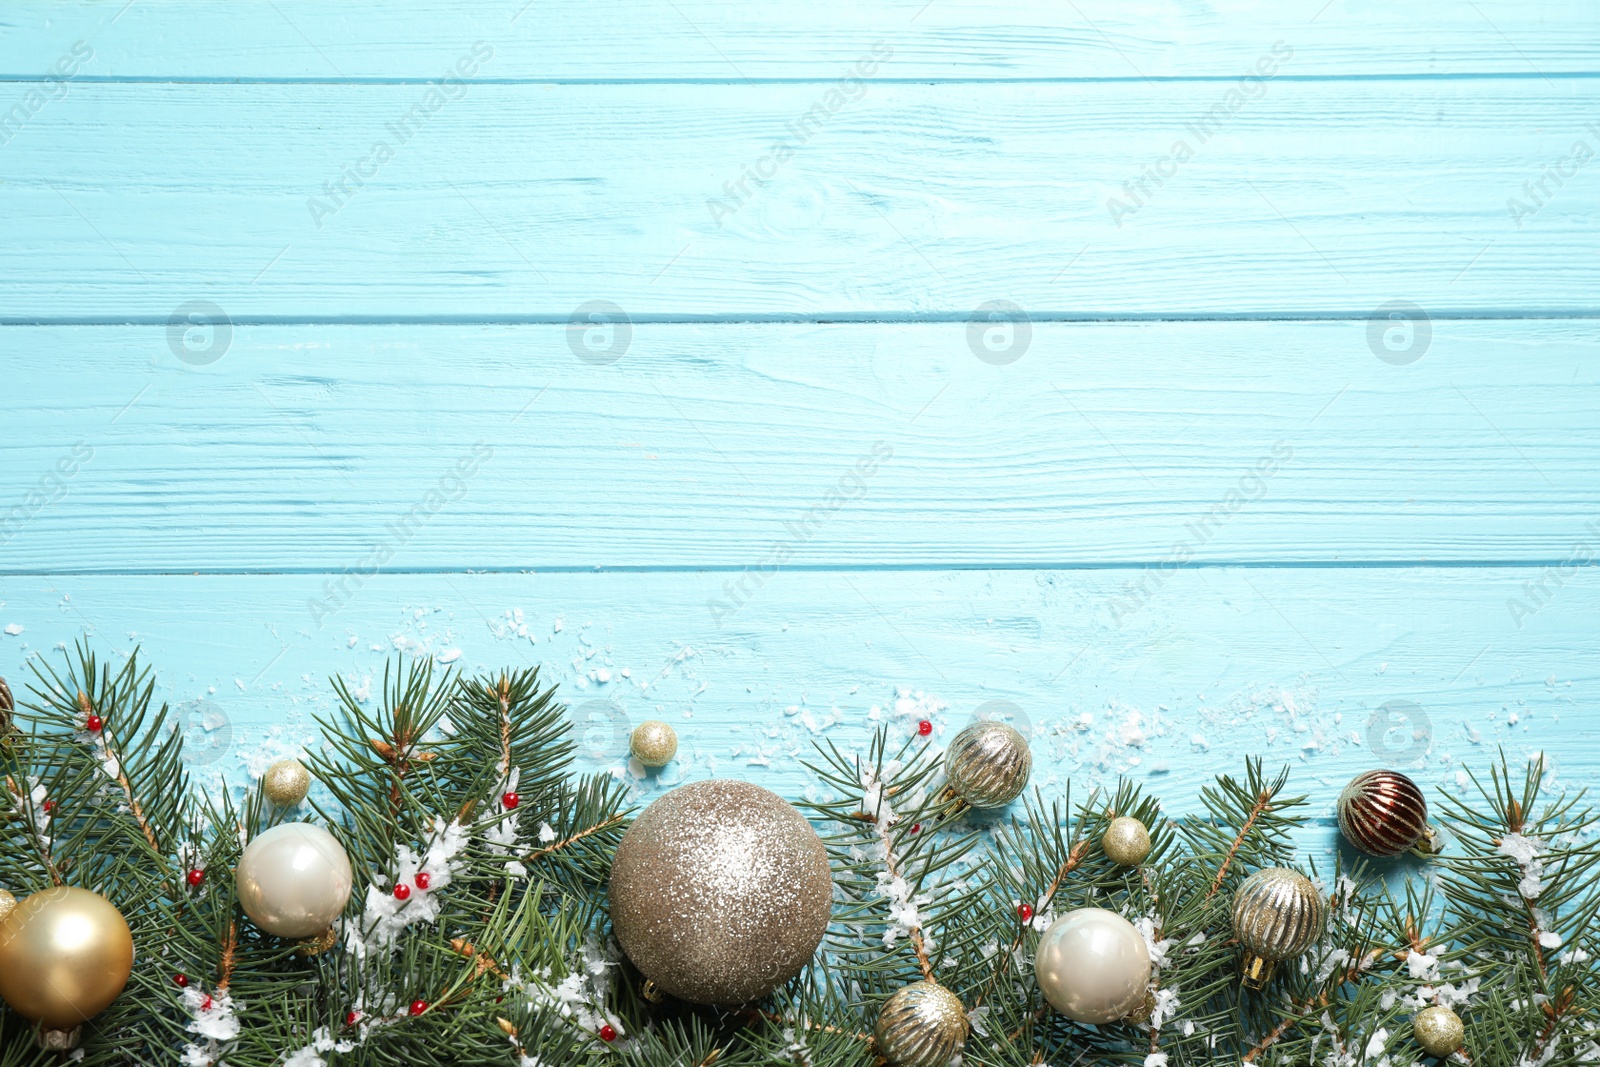 Photo of Fir tree branches with Christmas decoration on light blue wooden background, flat lay. Space for text